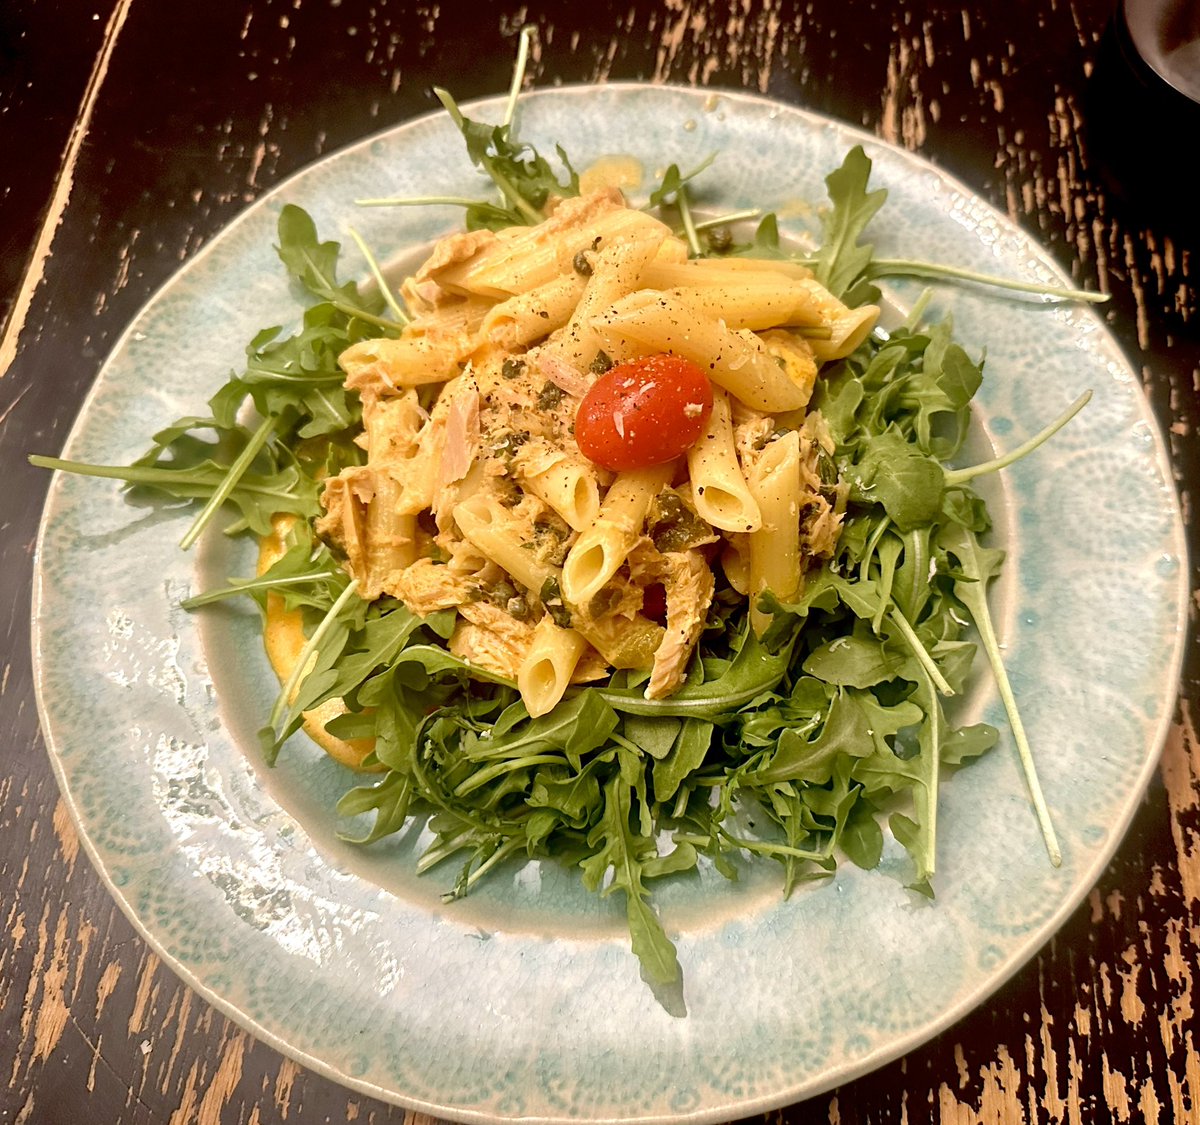 Second night of Pasta. This time, a creamy but spicy toninno Tuna sauce on a bed of Arugula 
#PCCMEats 
#EmptyNestersCooking